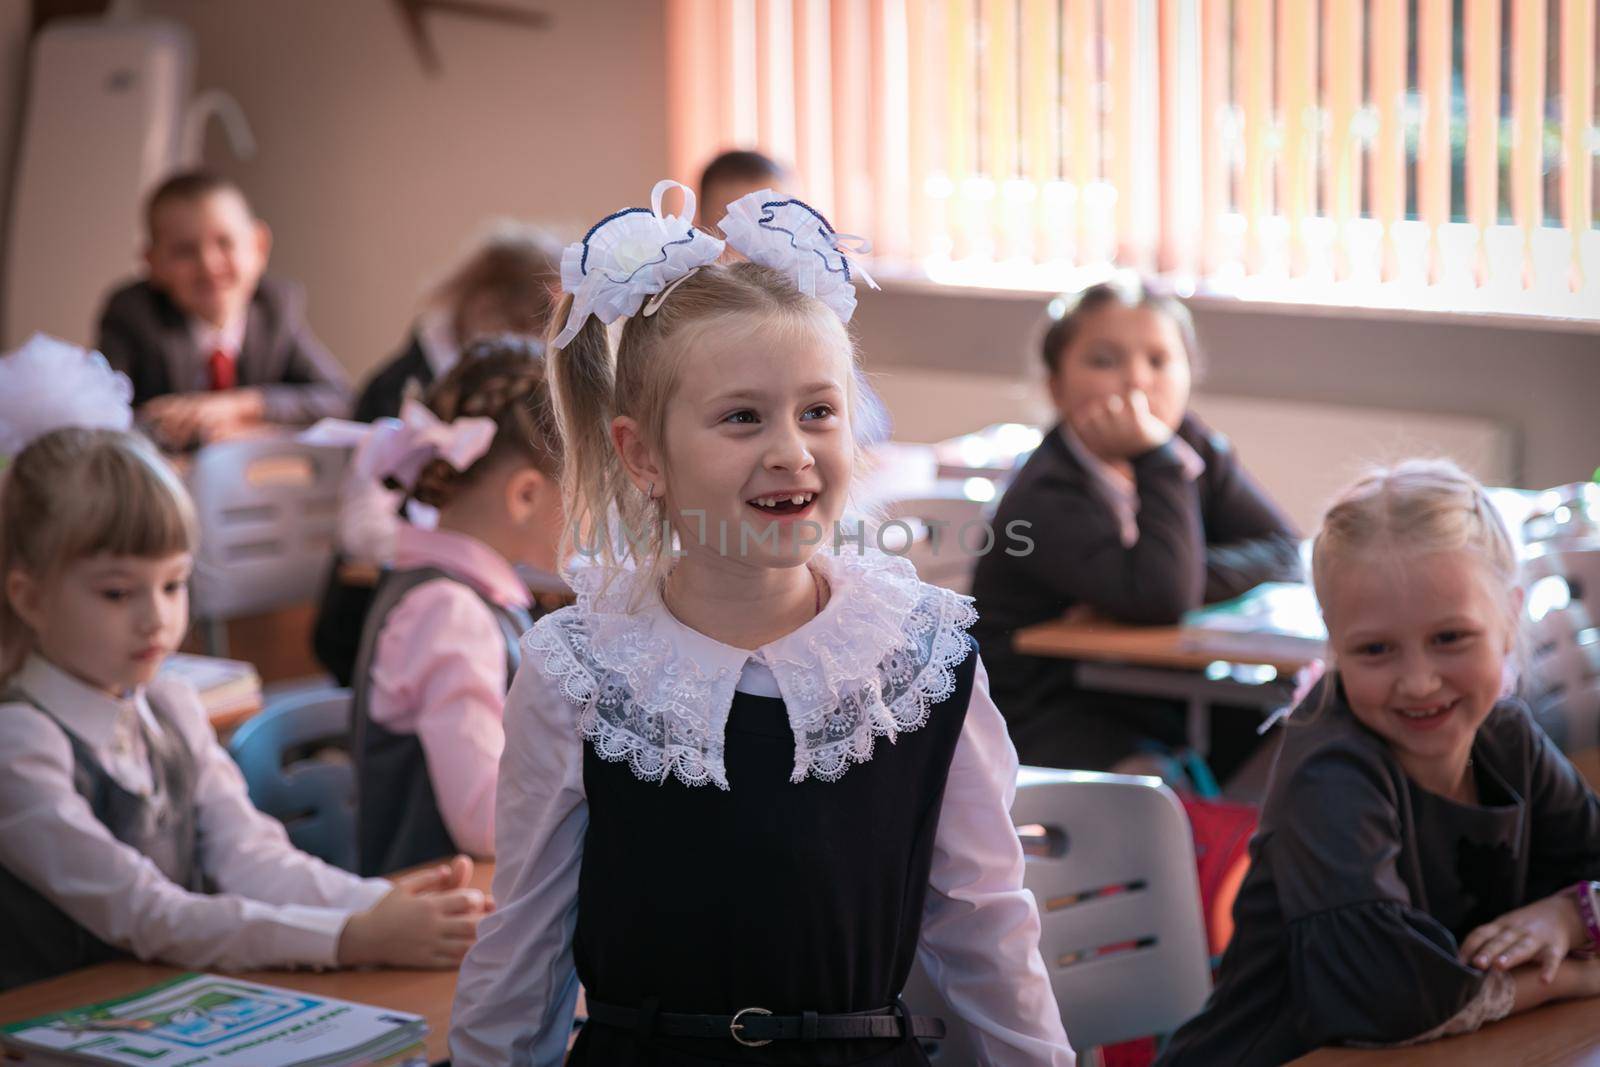 The first grader stands at the desk and answers the teacher's question. Moscow, Russia, September 2, 2019